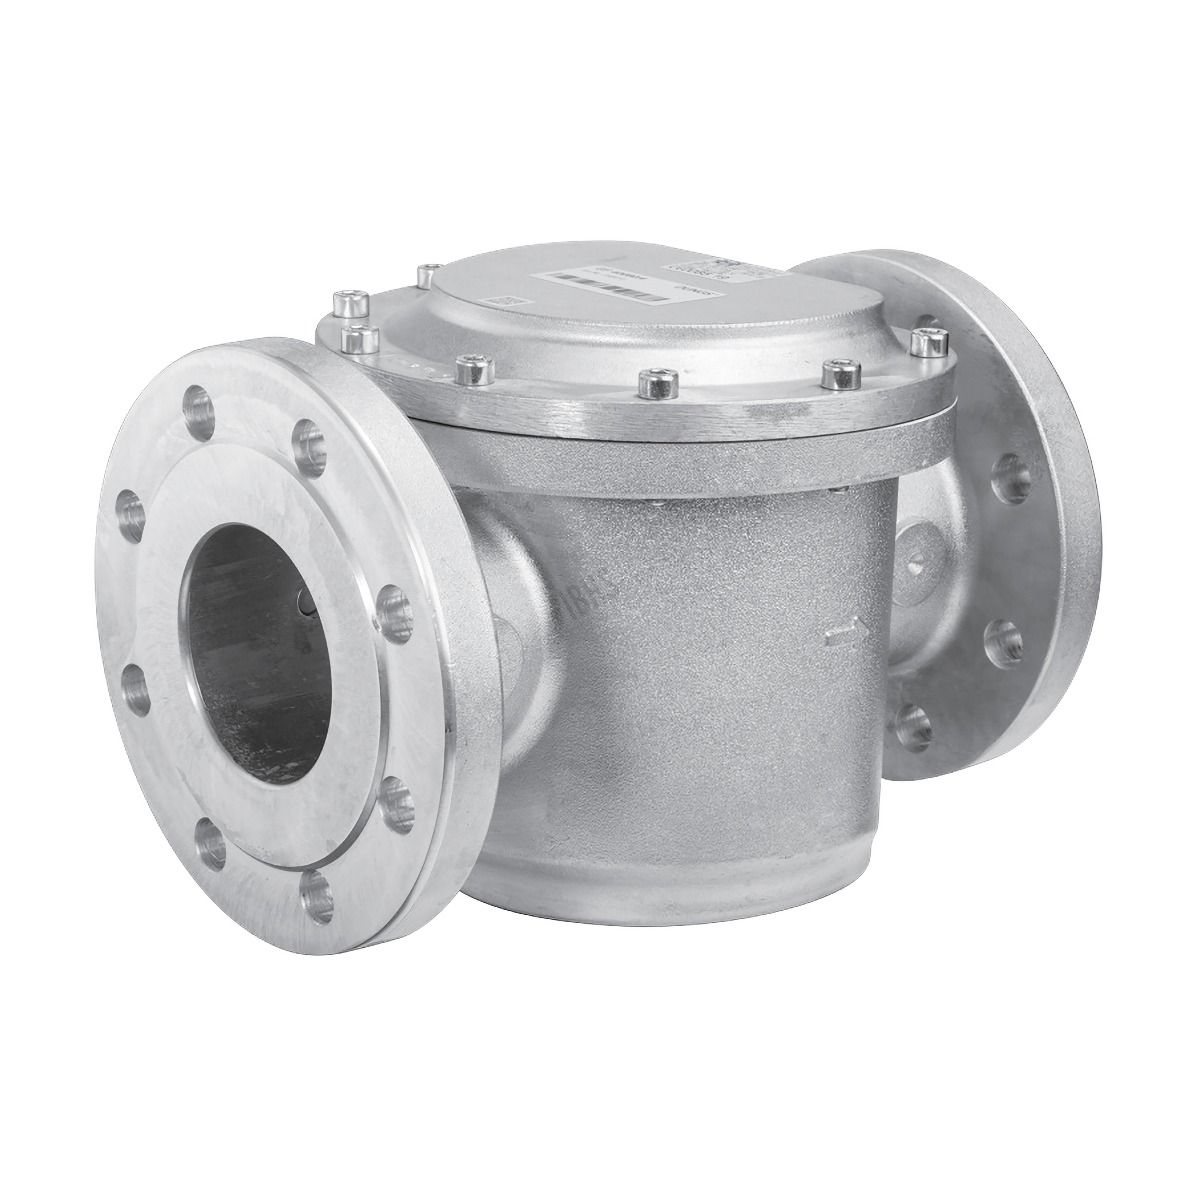 25mm Flanged PN16 Gas Filter 6 Bar Max Operating Pressure